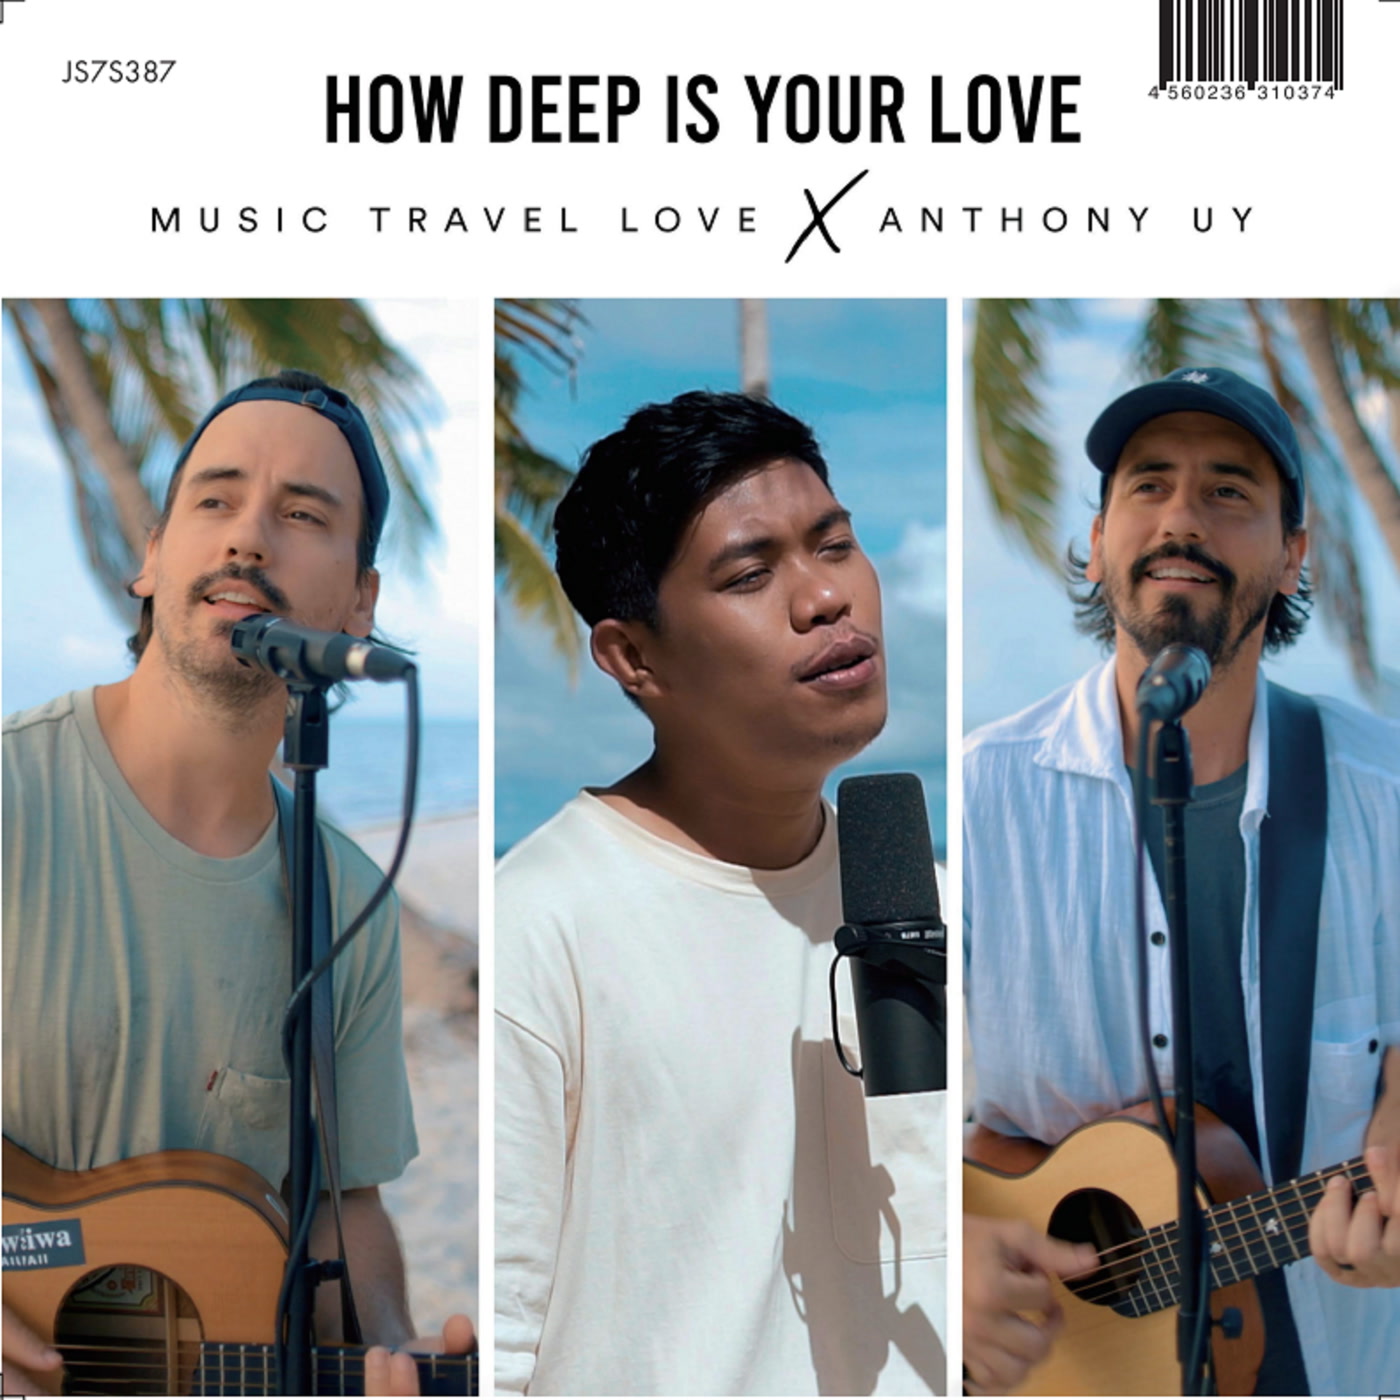 Music Travel Love – How Deep Is Your Love (Jet Set)